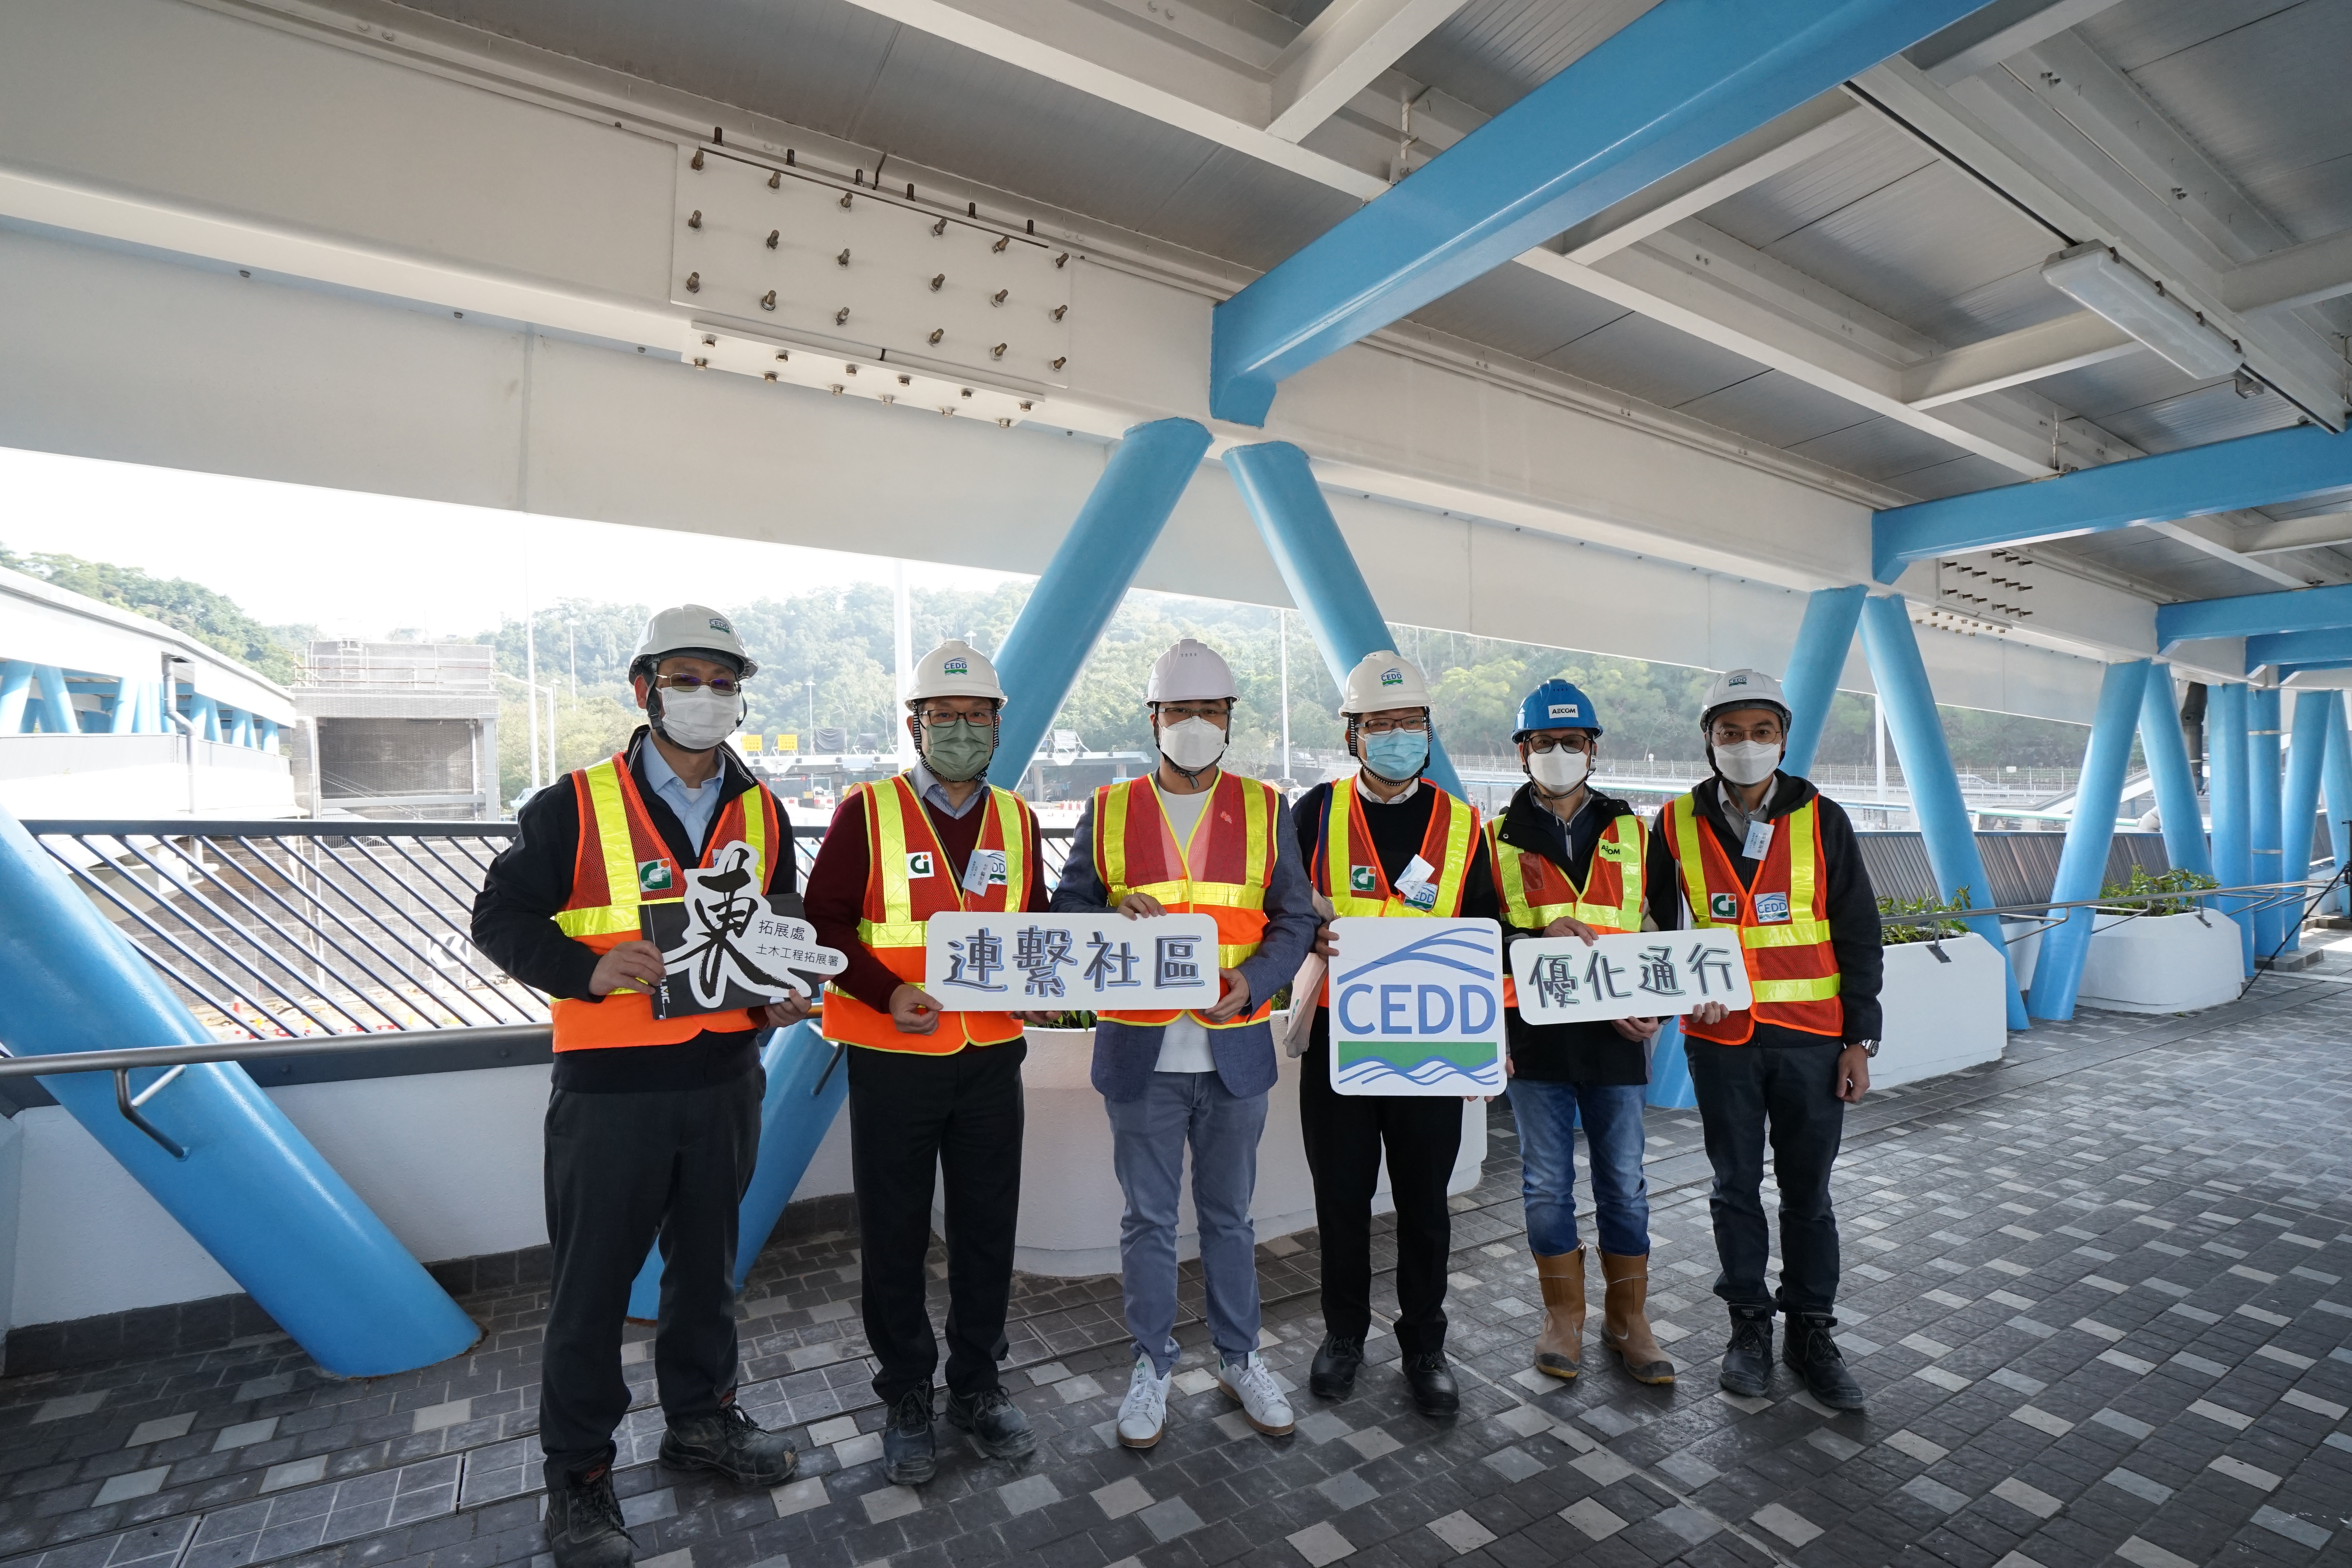 Member of the LegCo attended a site visit of Pedestrian Connectivity Facility located at the Tseung Kwan O Tunnel Bus-Bus Interchange (Tseung Kwan O Bound).